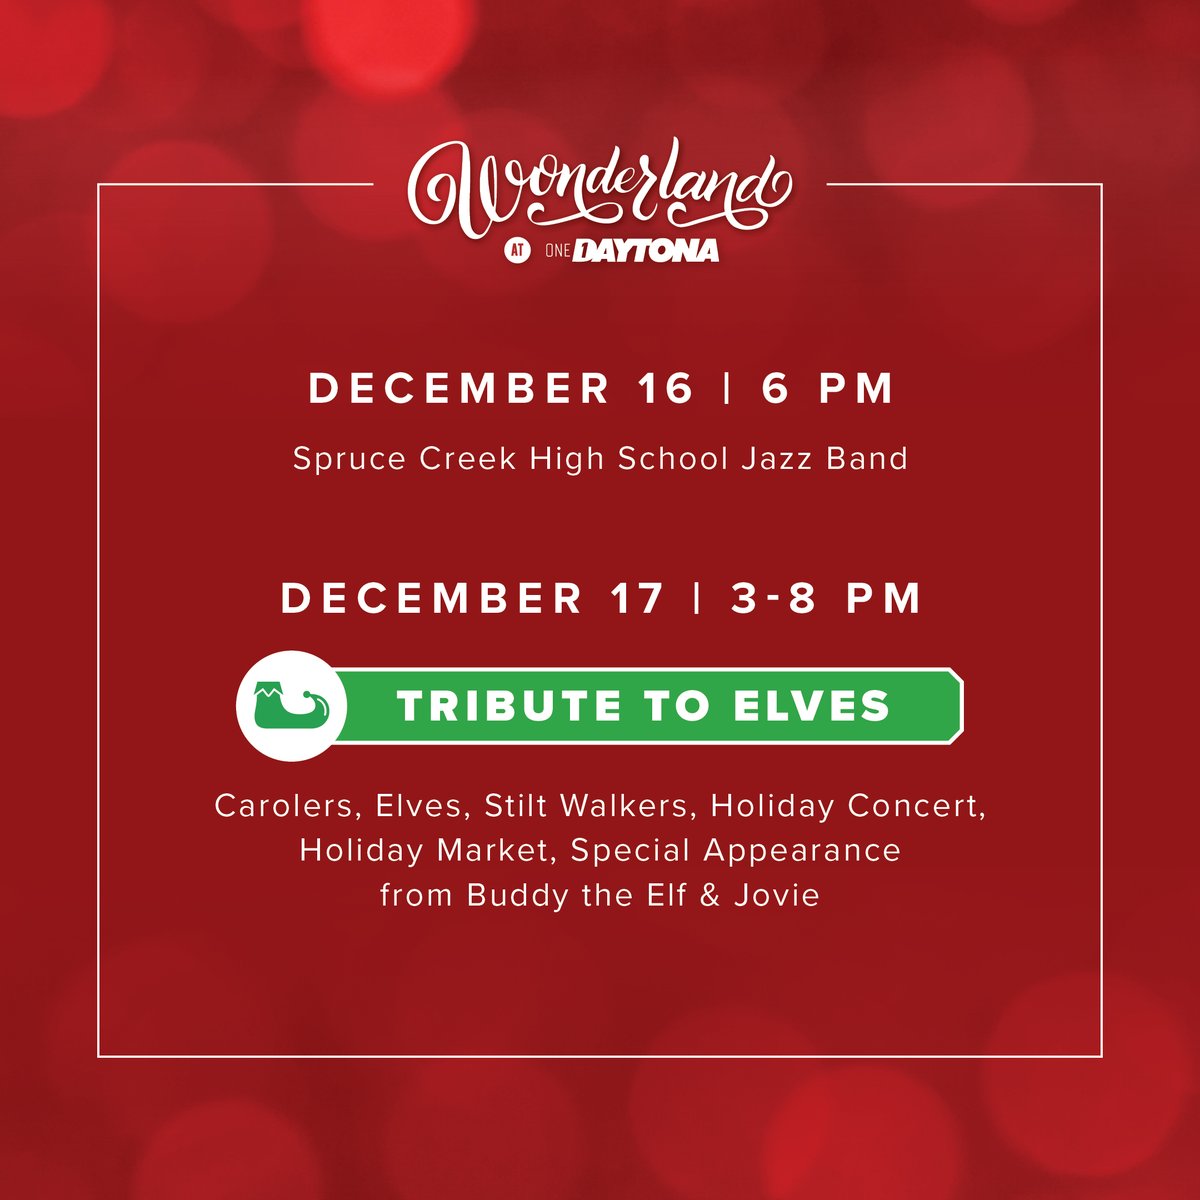 Join us next Saturday, Dec. 17, for a tribute to elves featuring your favorite elves, Buddy & Jovie. This will be the last Wonderland Special Character Meet & Greet of the holiday season. Be sure to sign up to capture the fun times and endless memories. bit.ly/3UMPWd9